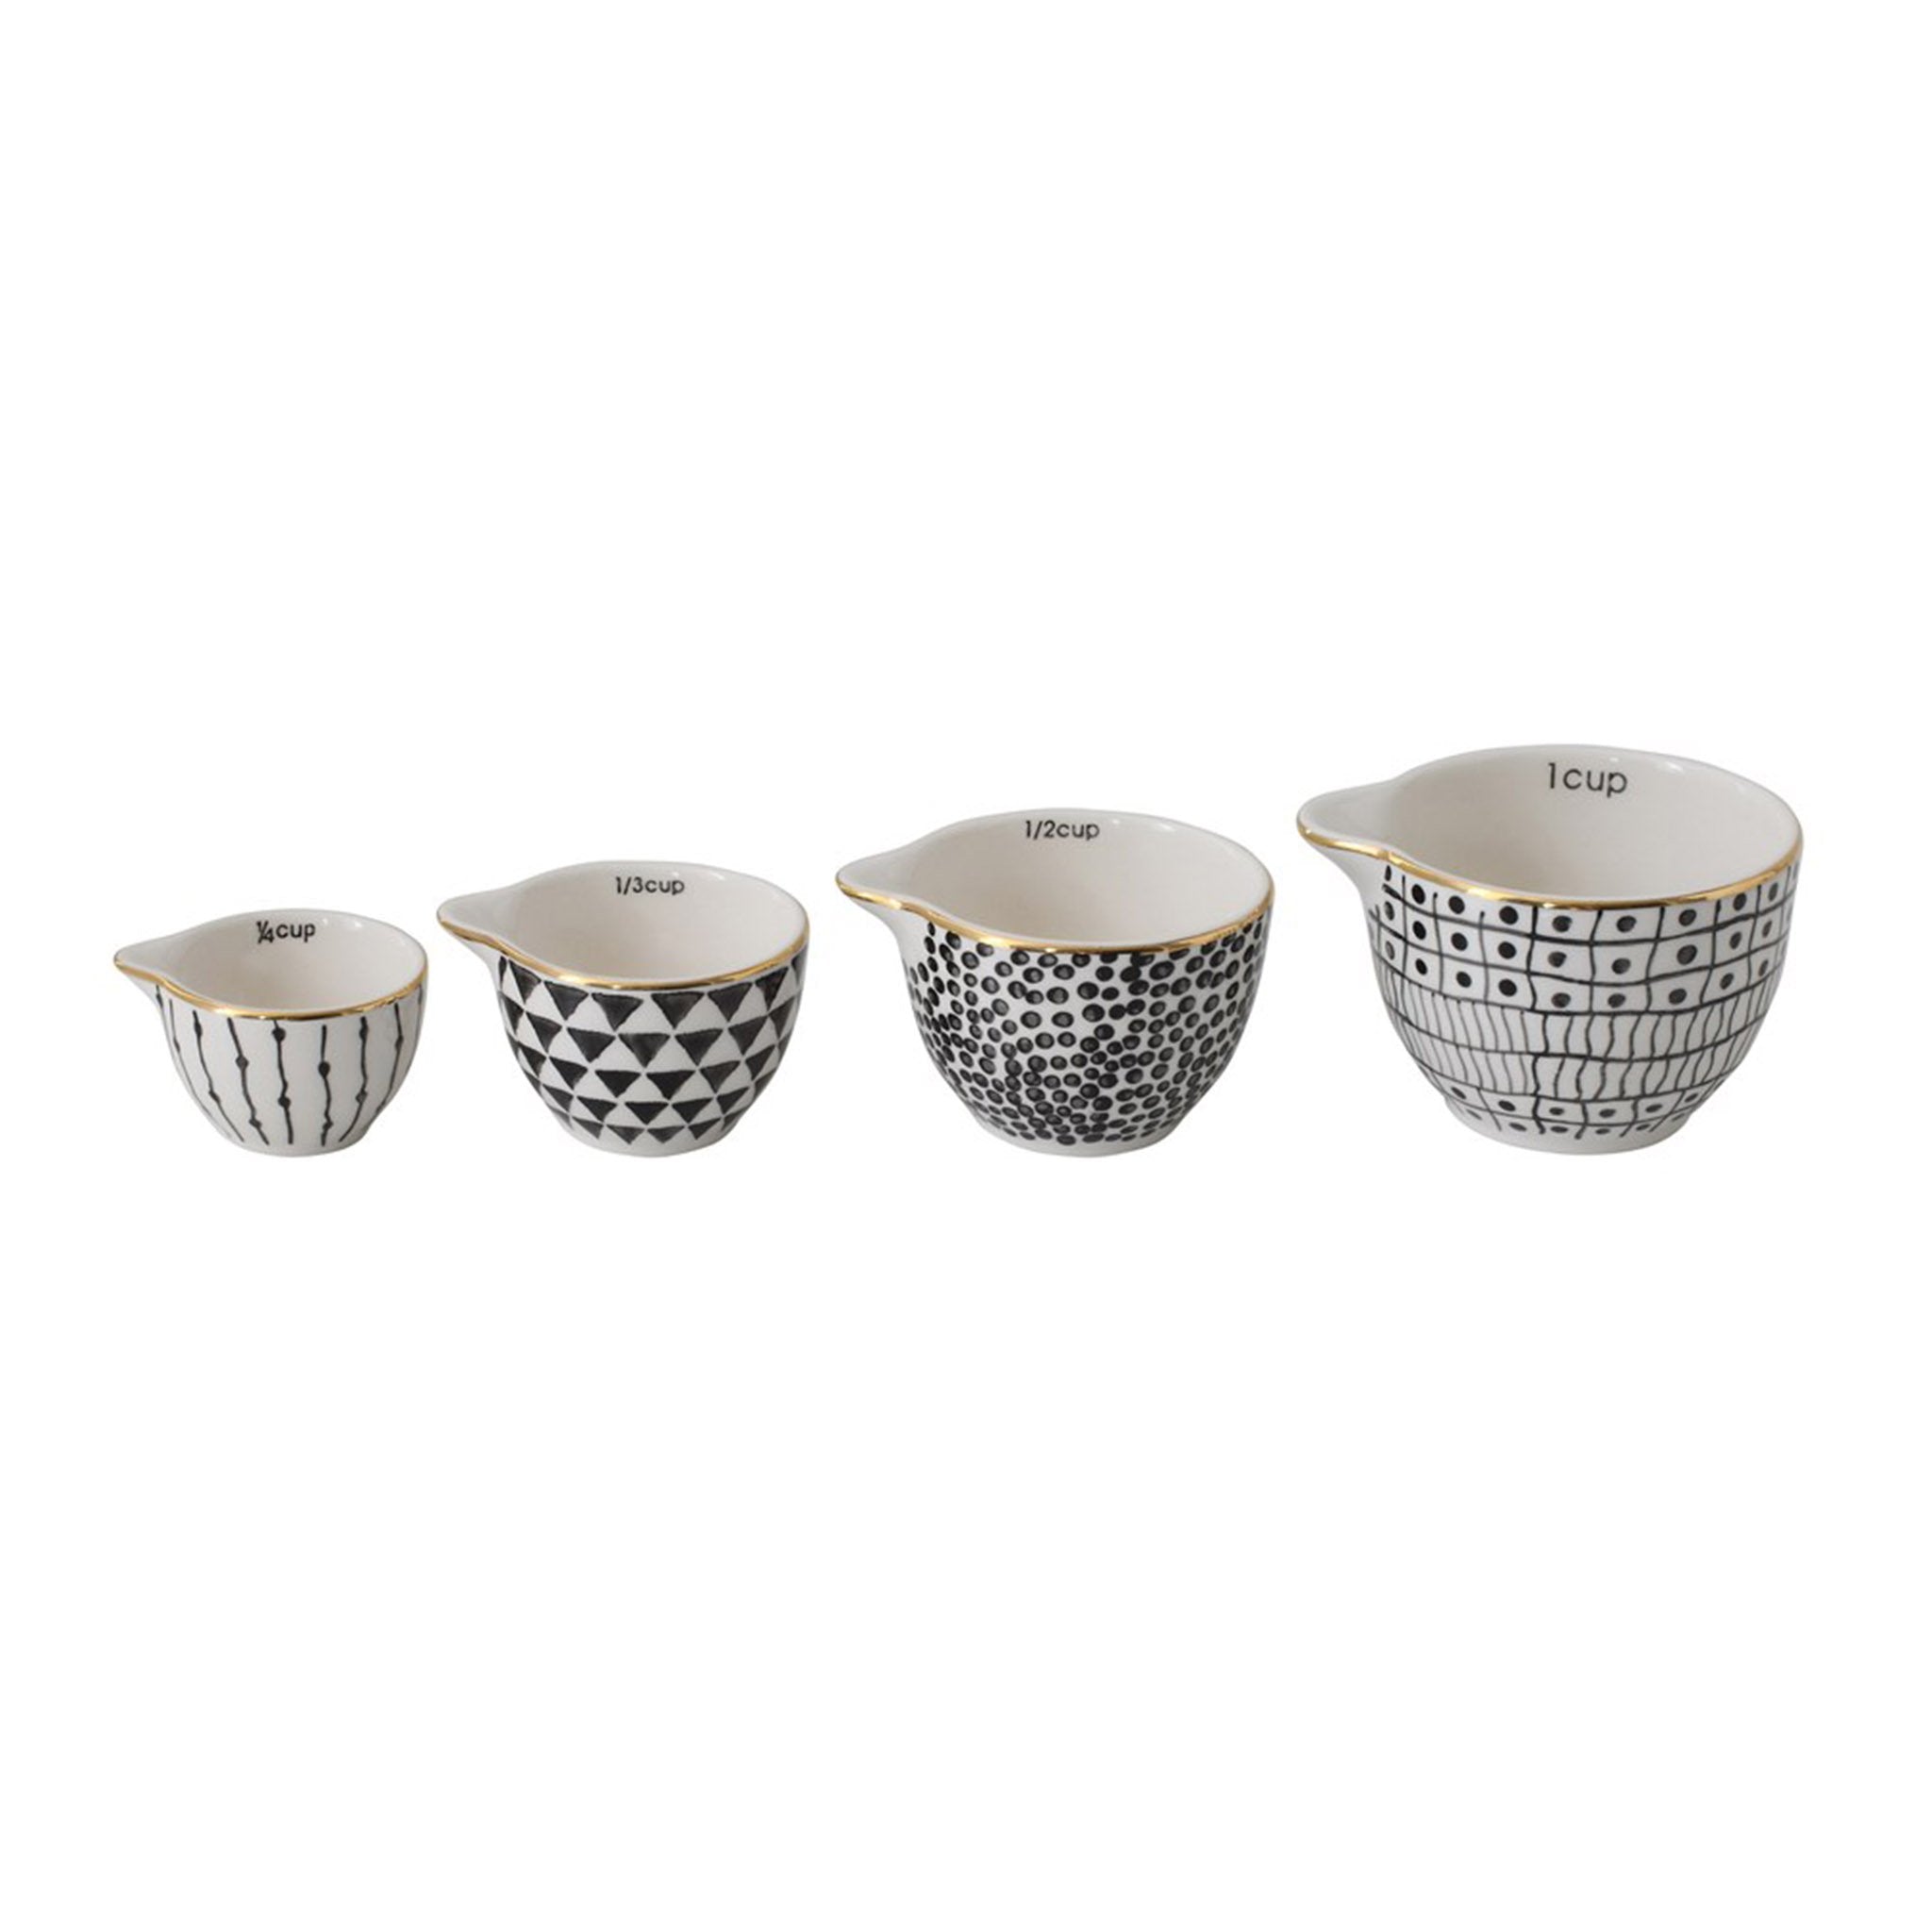 https://blueribbongeneralstore.com/cdn/shop/products/creative-coop-stoneware-measuring-cups-with-black-pattern-and-gold-electroplating-individual.jpg?v=1583551570